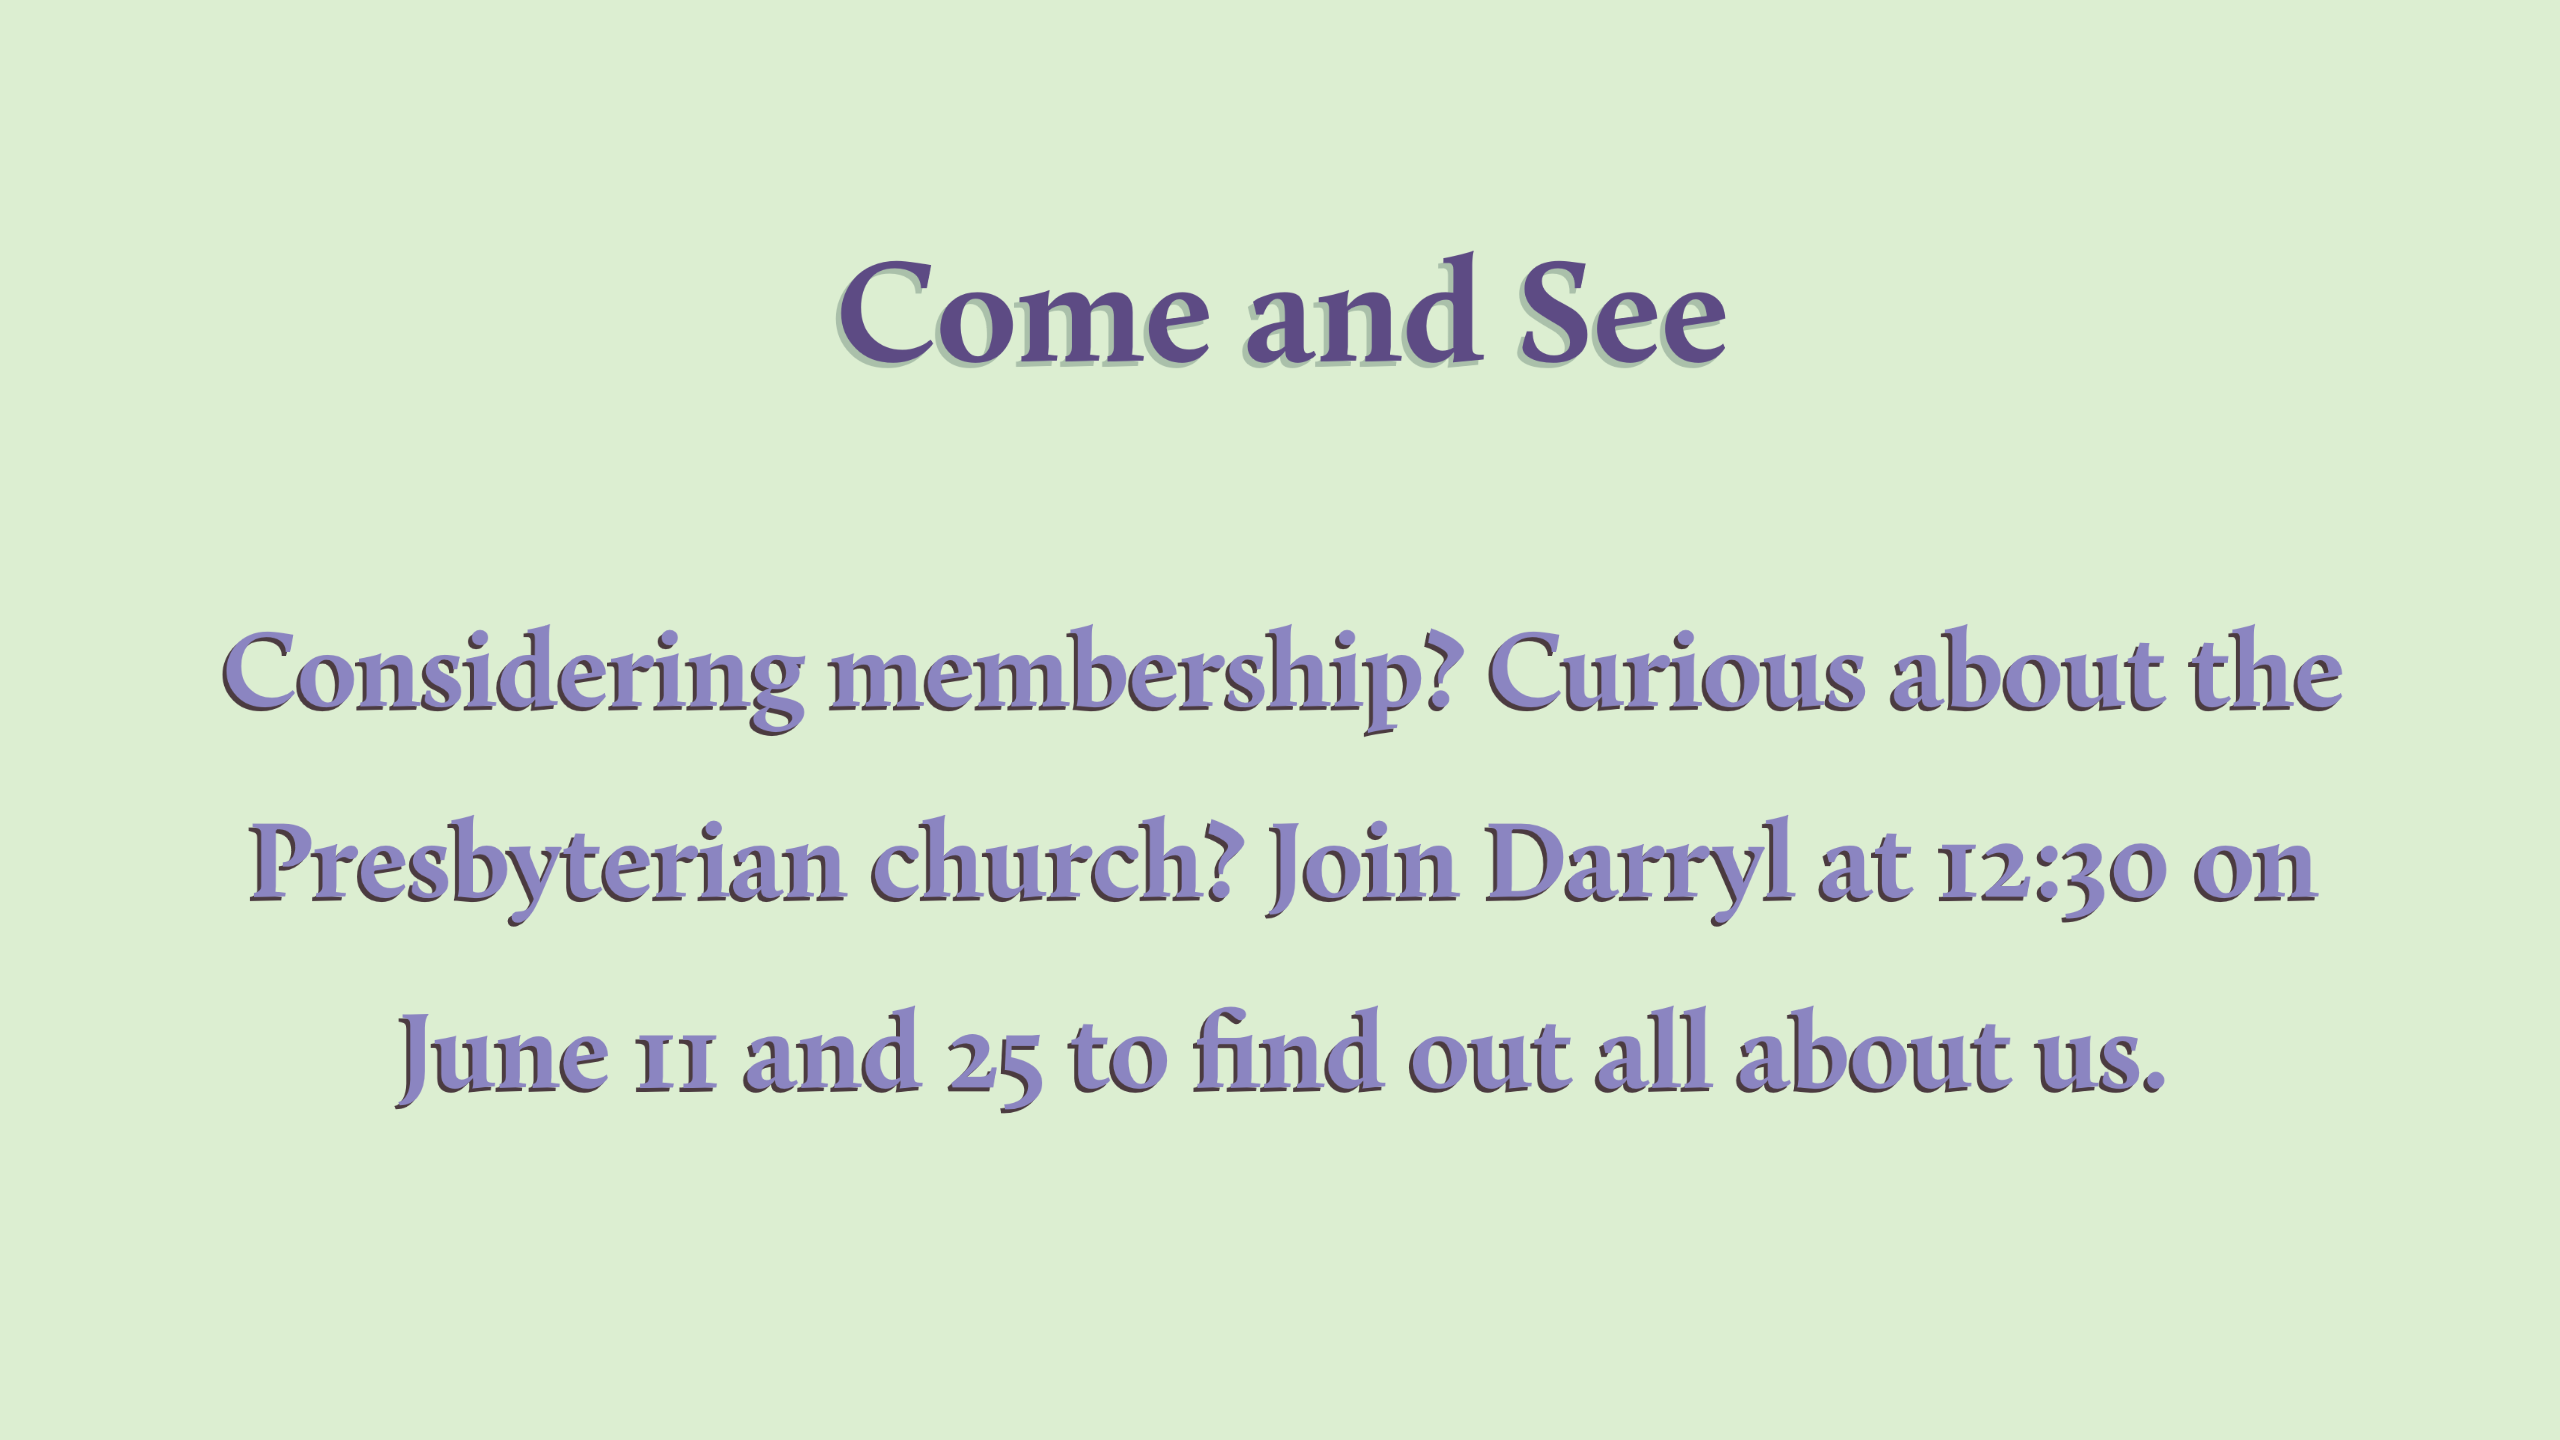 purple text on a green background reading "Come and See Considering membership? Curious about the Presbyterian church? Join Darryl at 12:30 on June 11 and 25 to find out all about us."